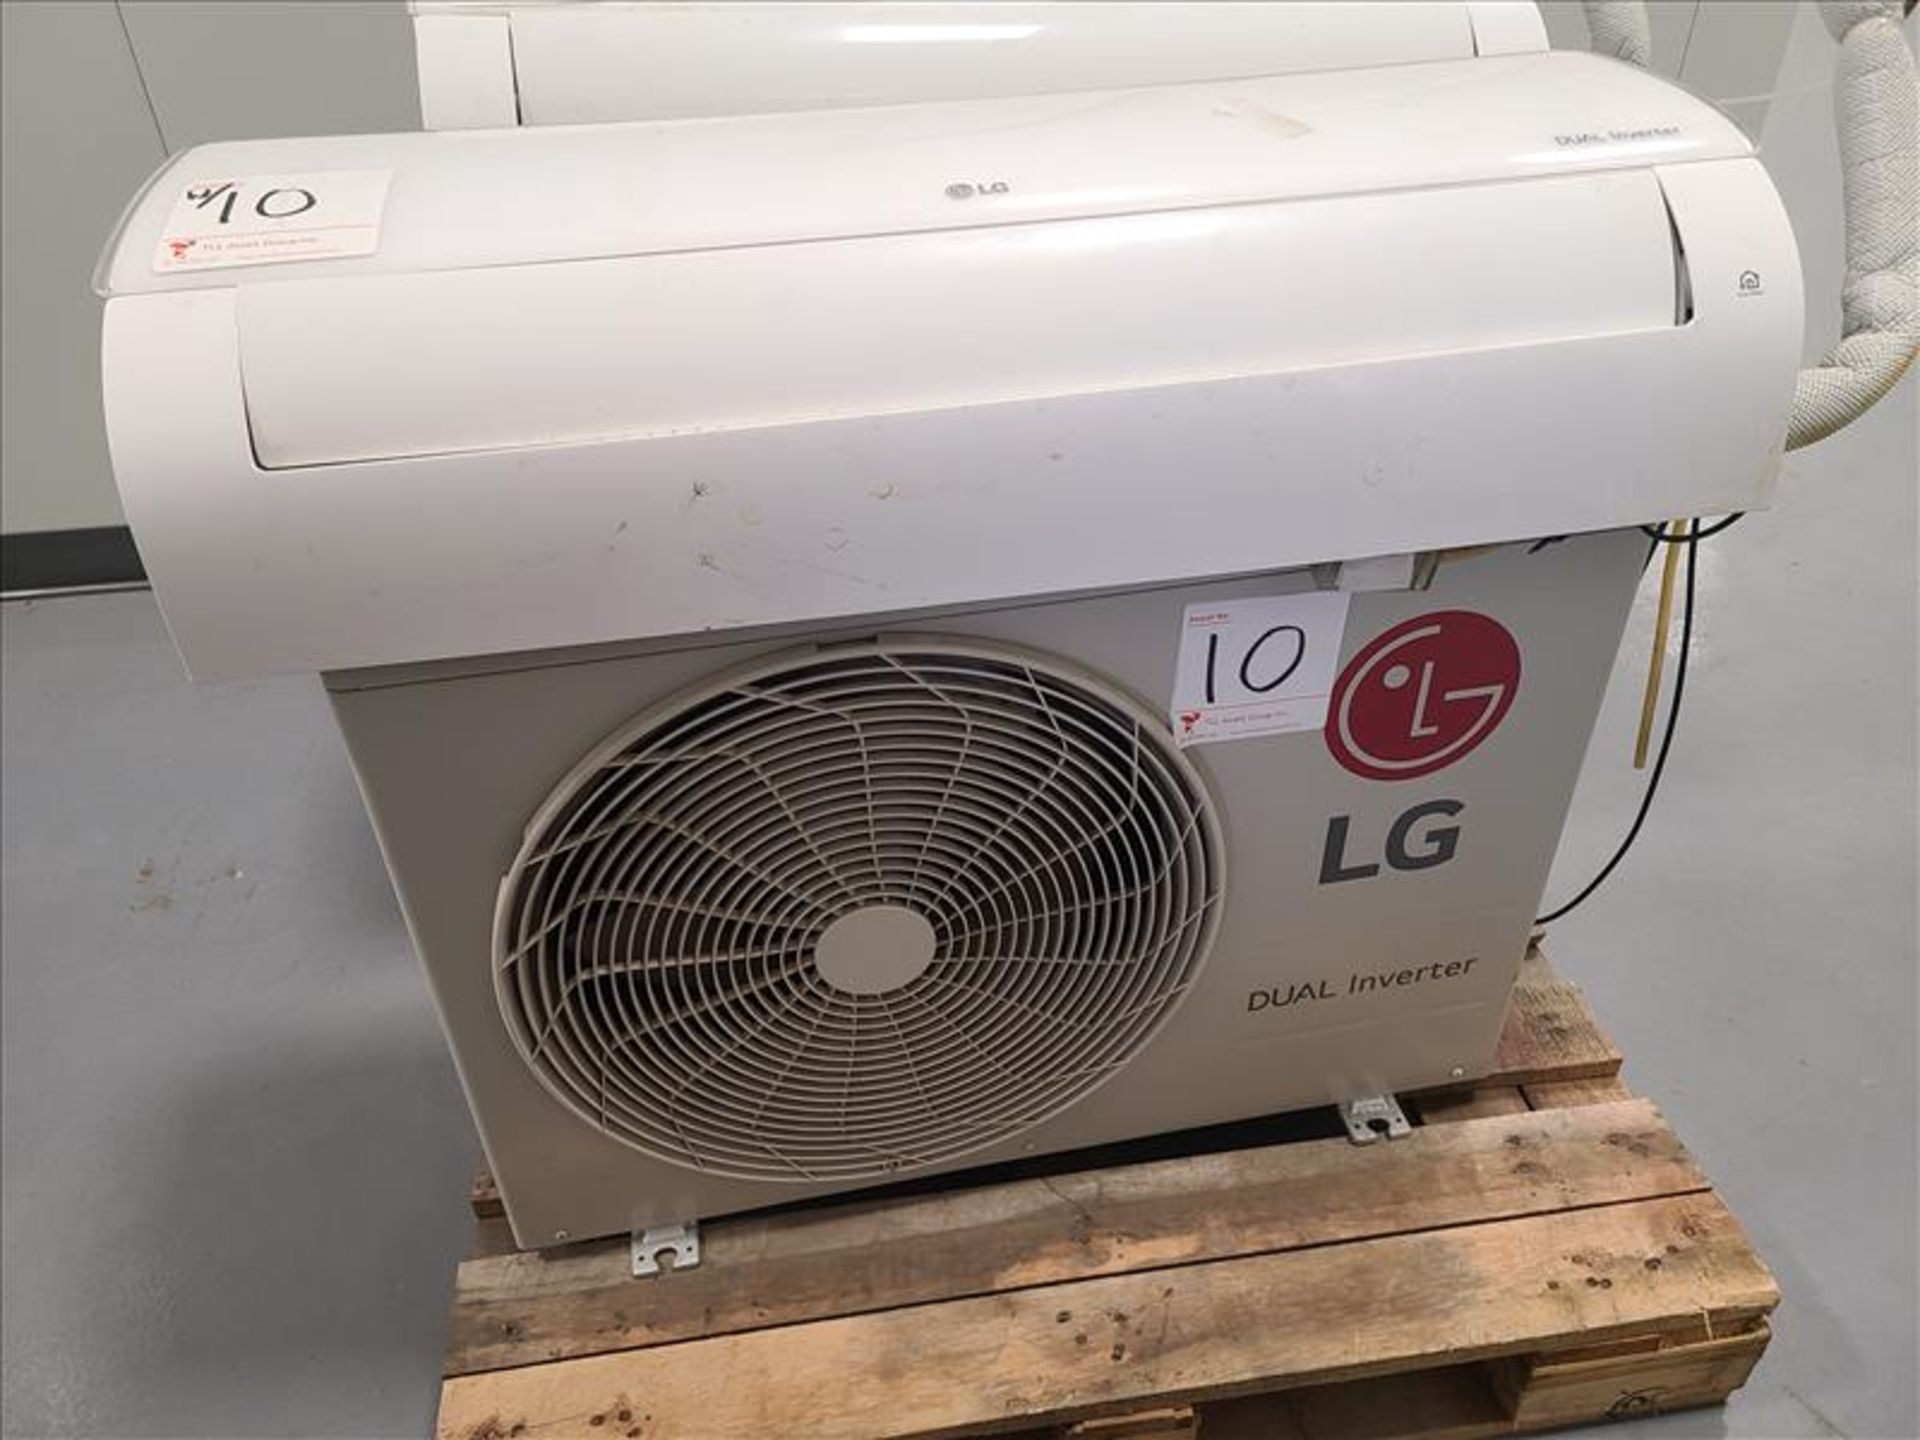 LG Cooling/Heating Wall Mounted Air Conditioning System, model LSN120HSV5, S/N 804KALC0TD40, w/ LG